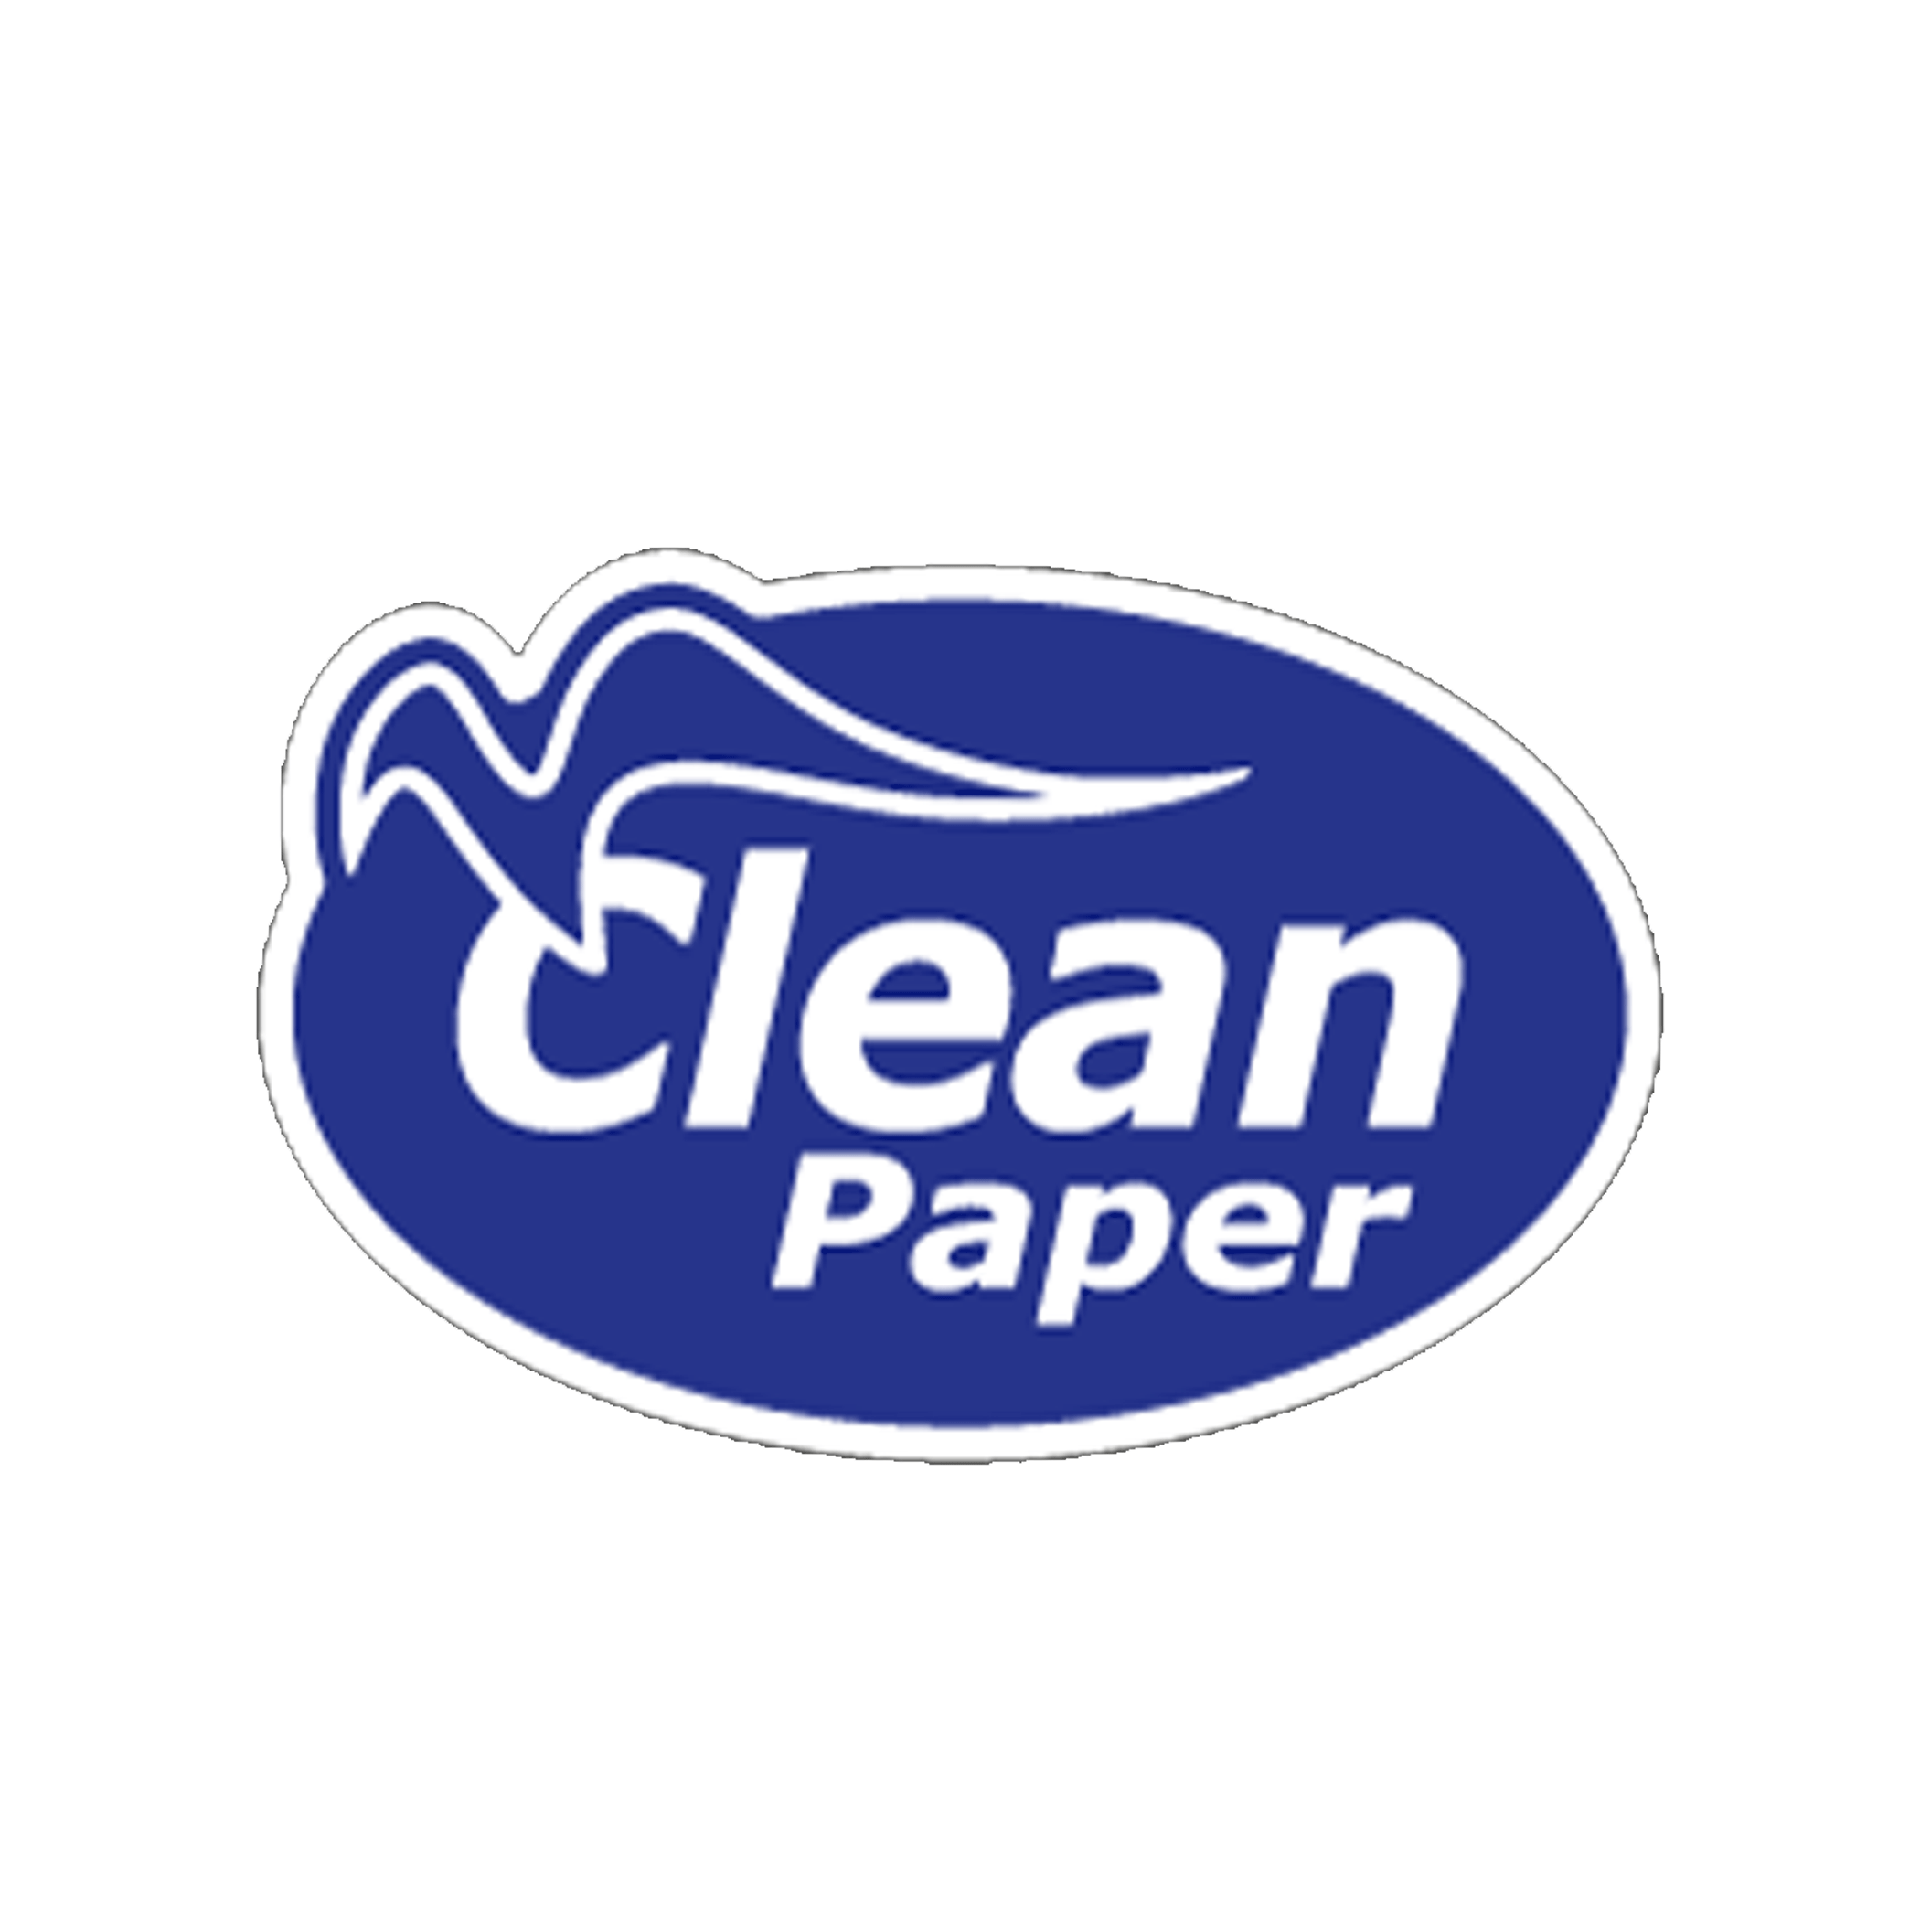 Product Brand: Clean